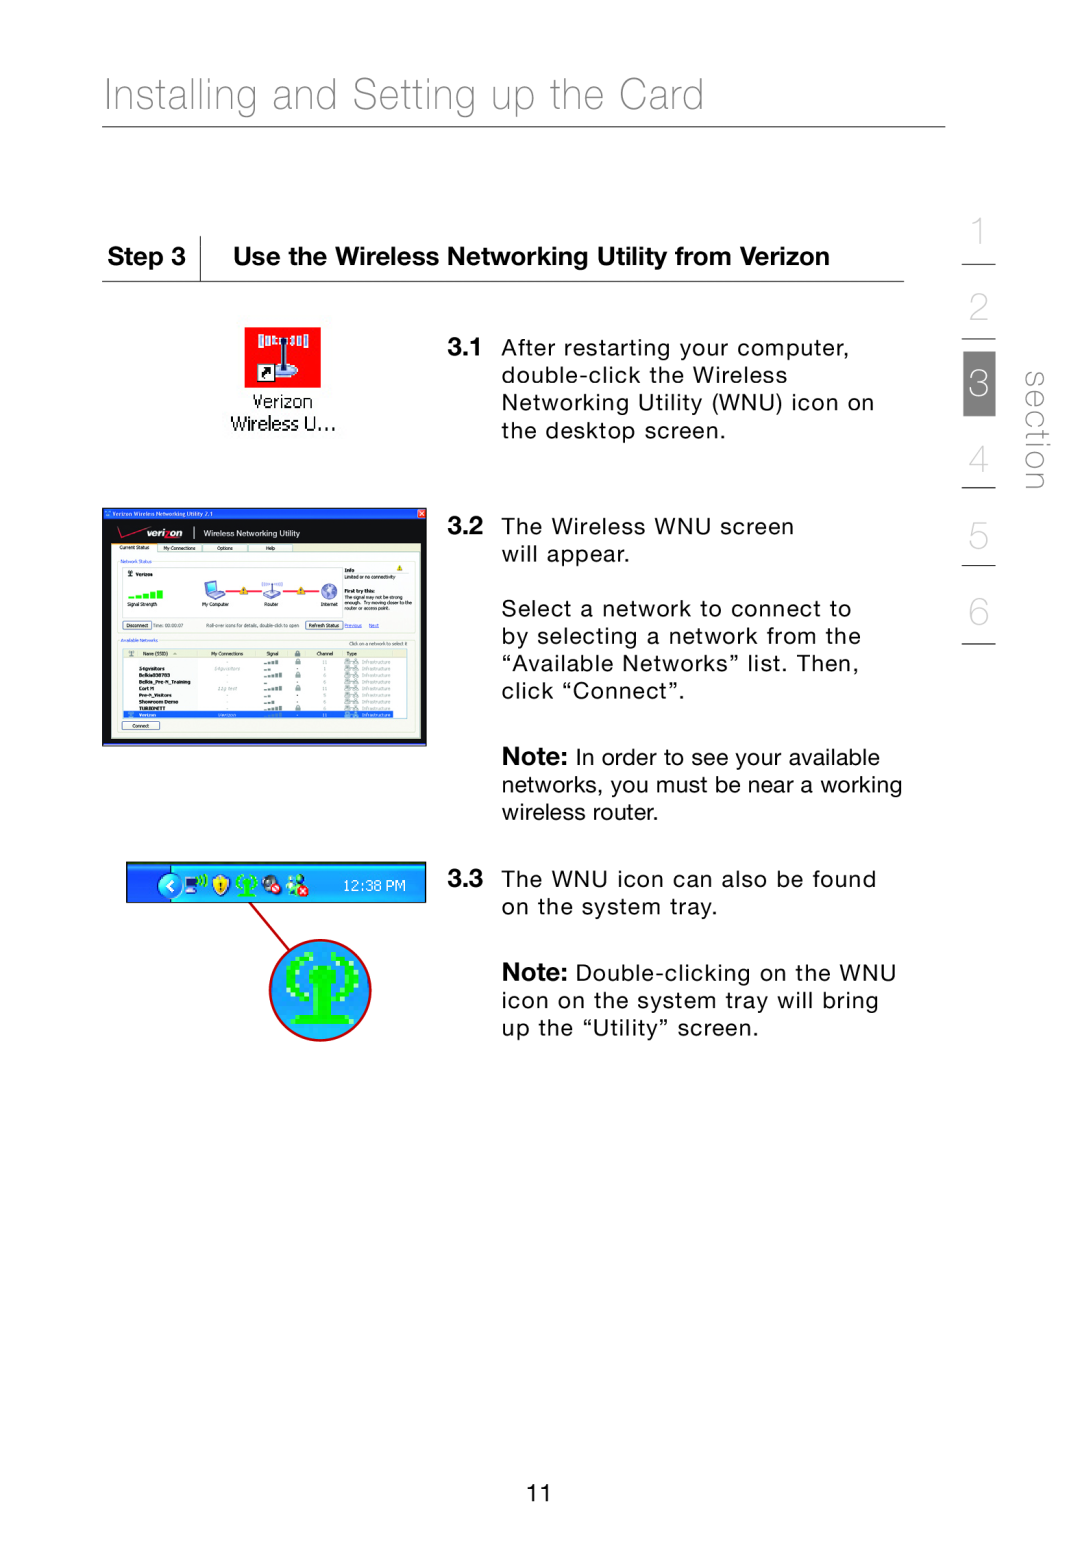 Verizon VZ4000 manual Use the Wireless Networking Utility from Verizon, Installing and Setting up the Card, section 